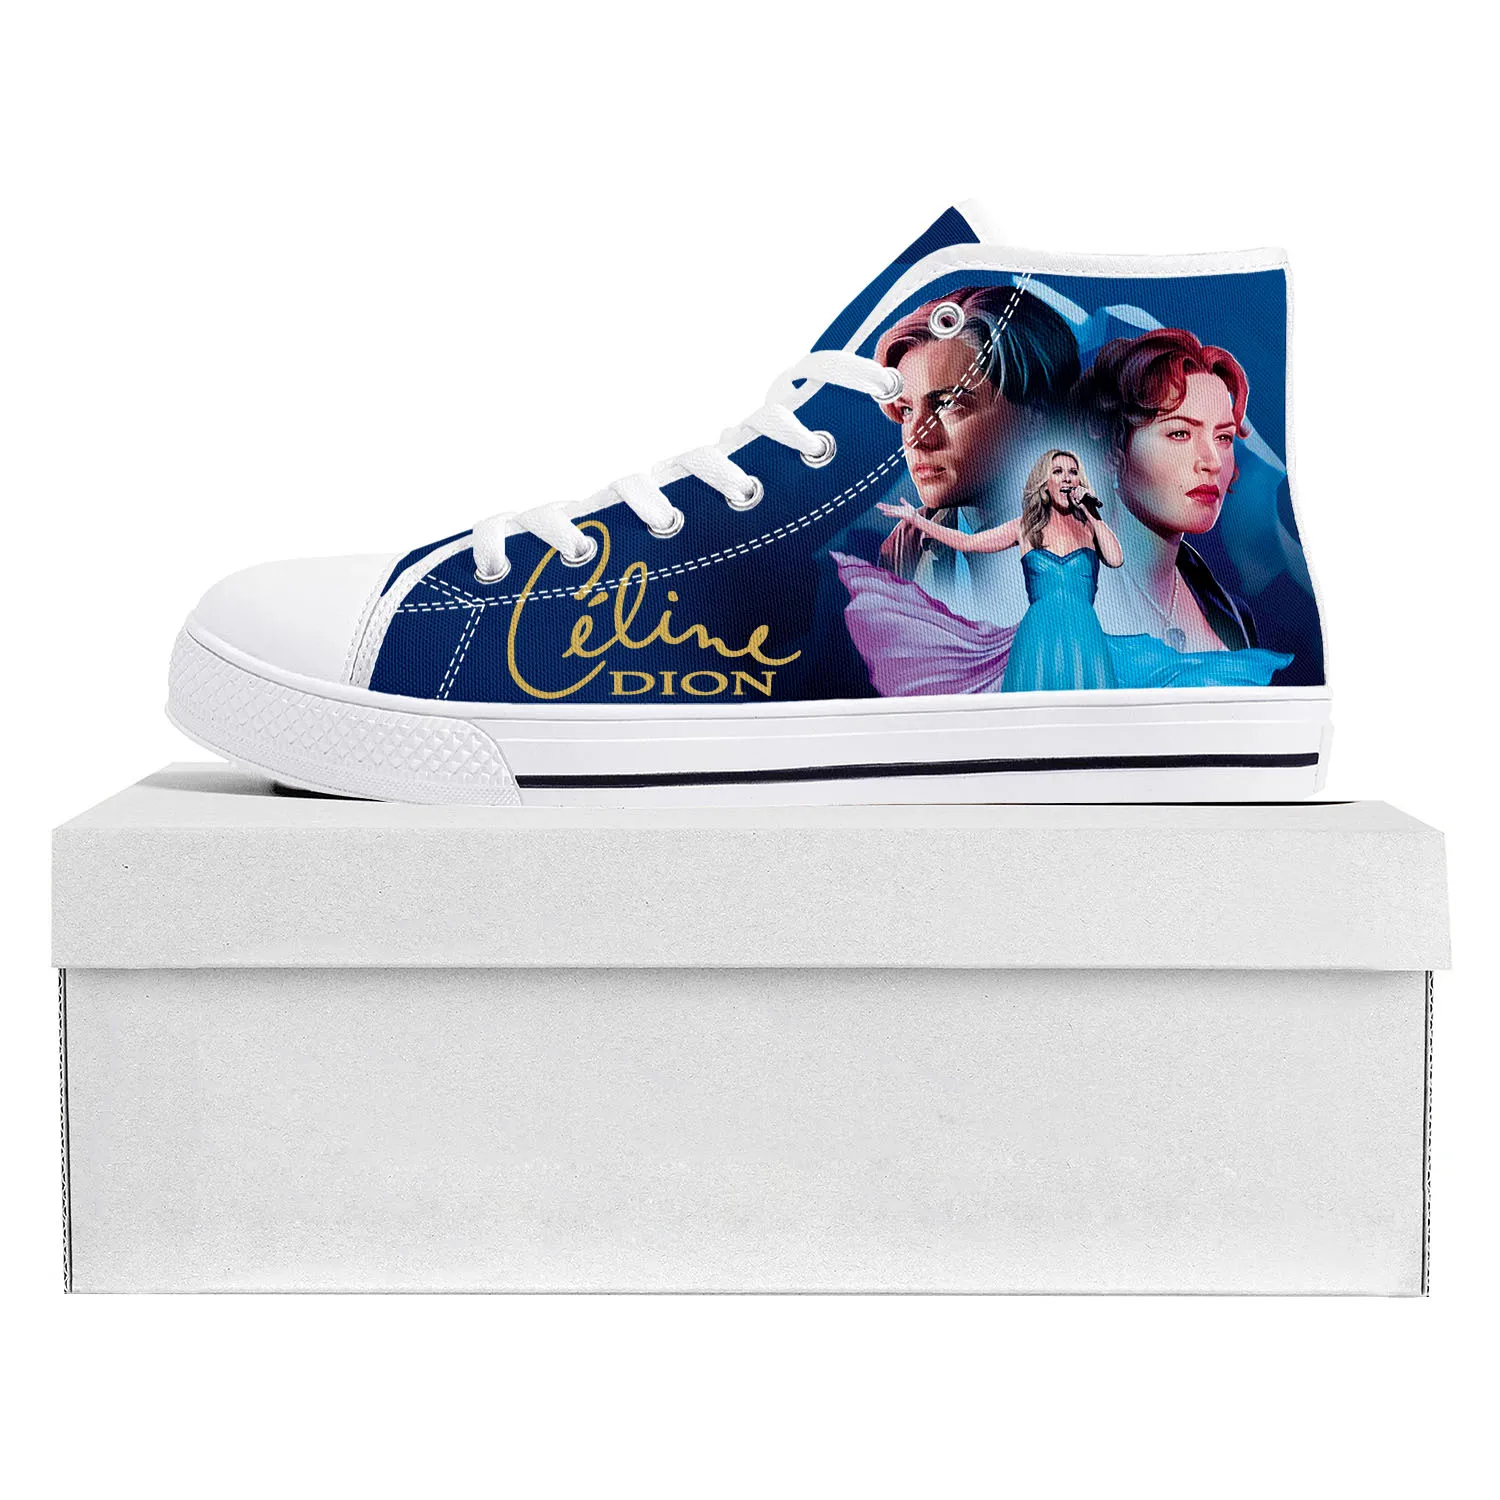 

Celine Dion My Heart Will Go on High Top Sneakers Mens Womens Teenager High Quality Sneaker Custom Made Shoes Customize Shoe